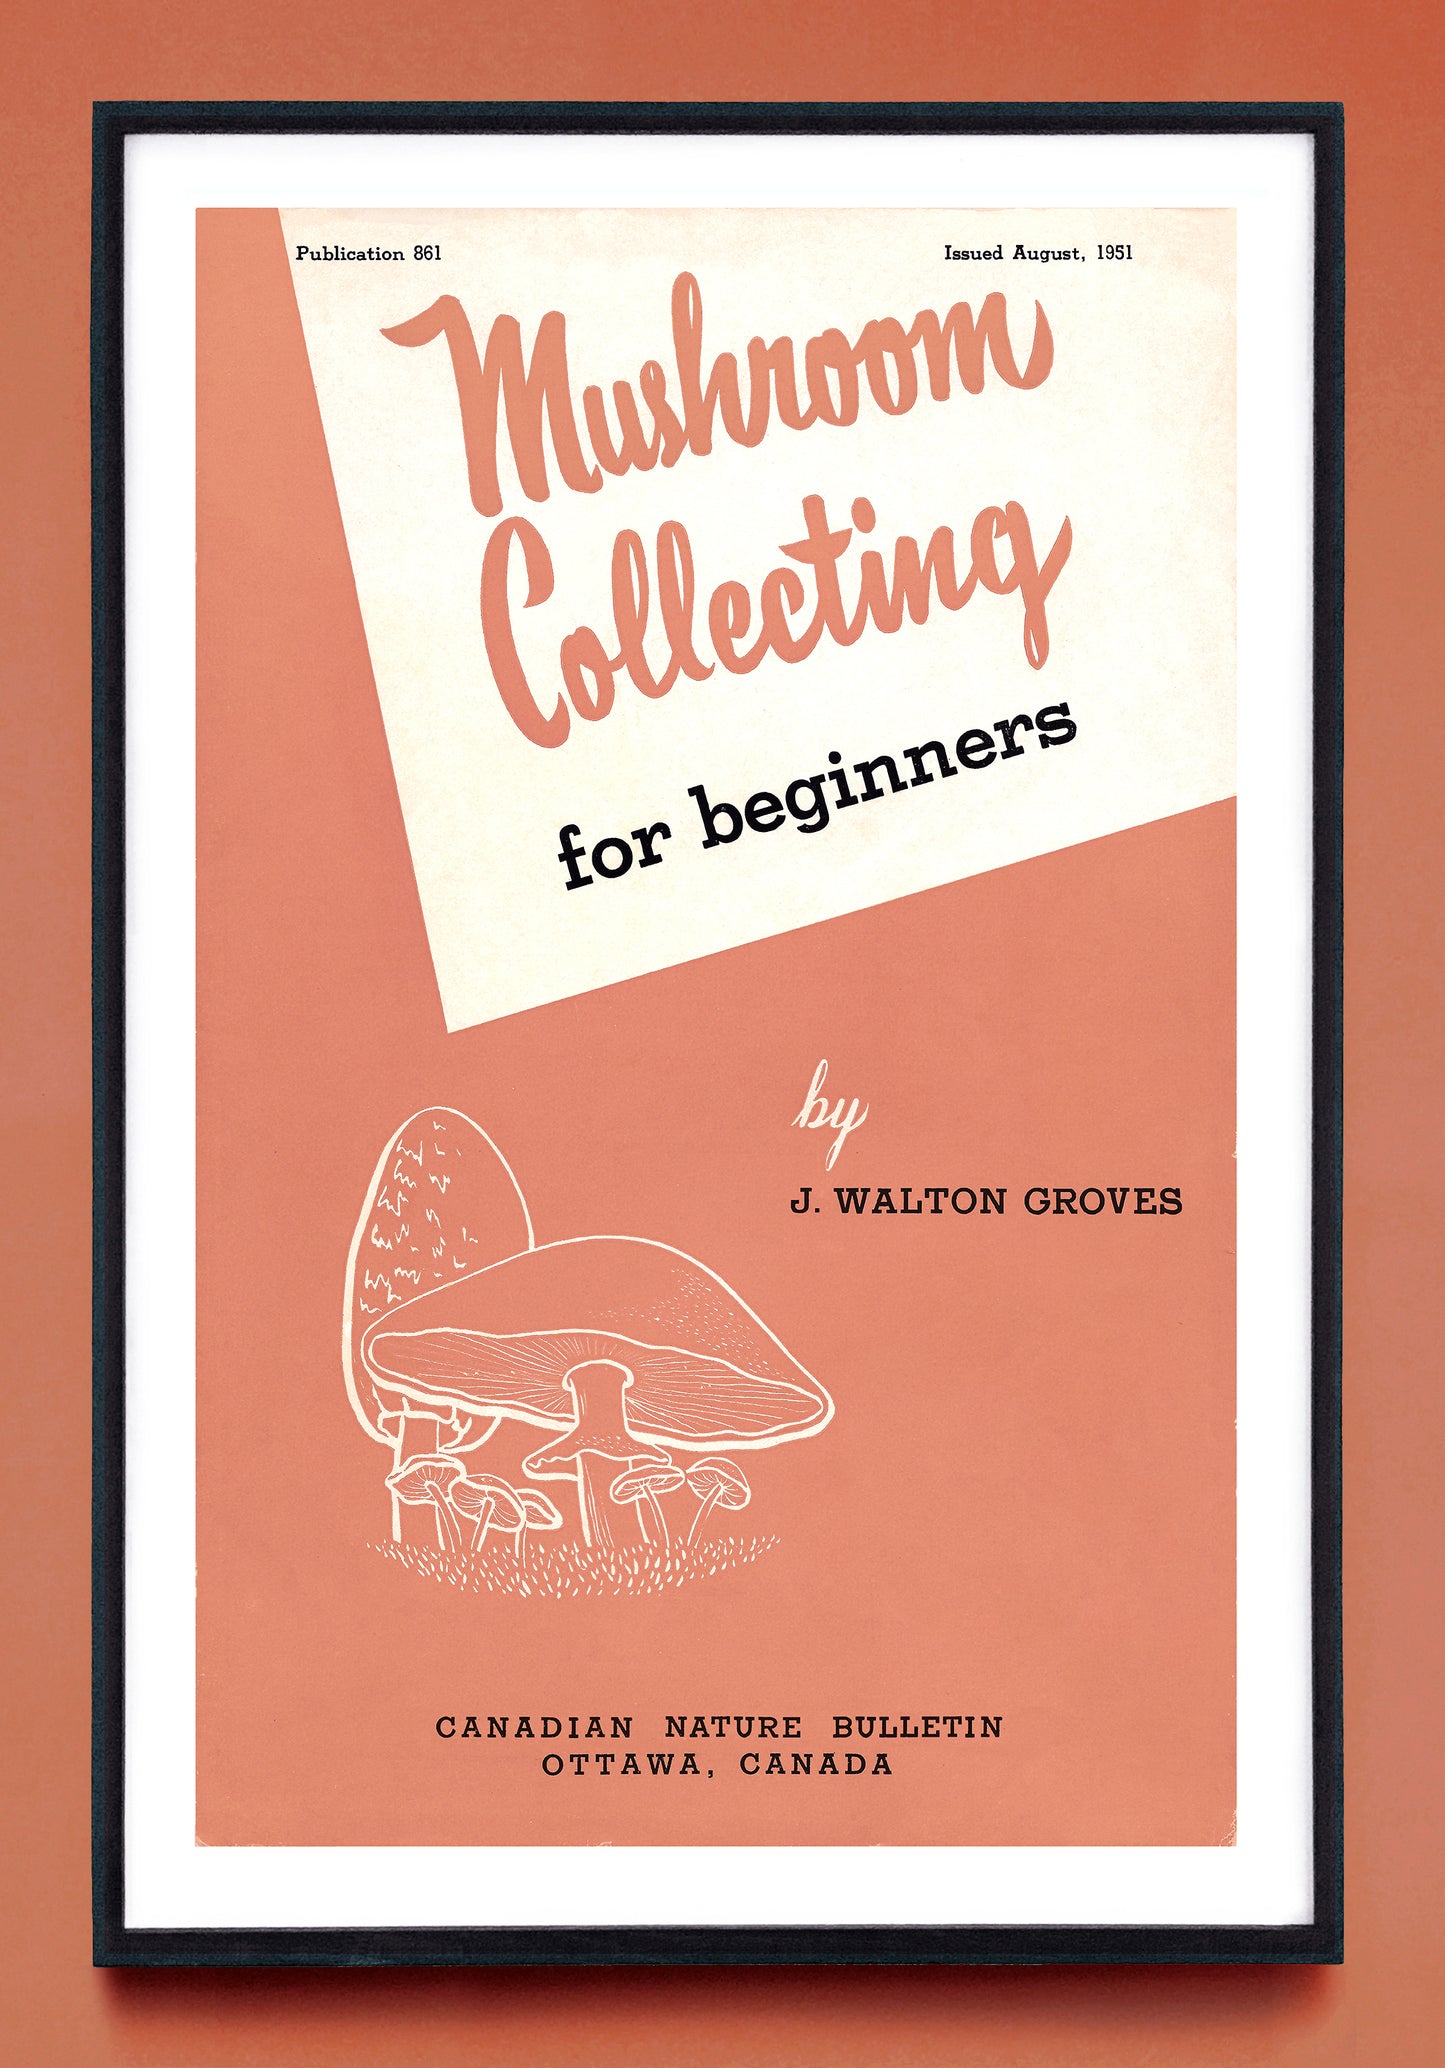 "Mushroom Collecting for Beginners" print (1951)